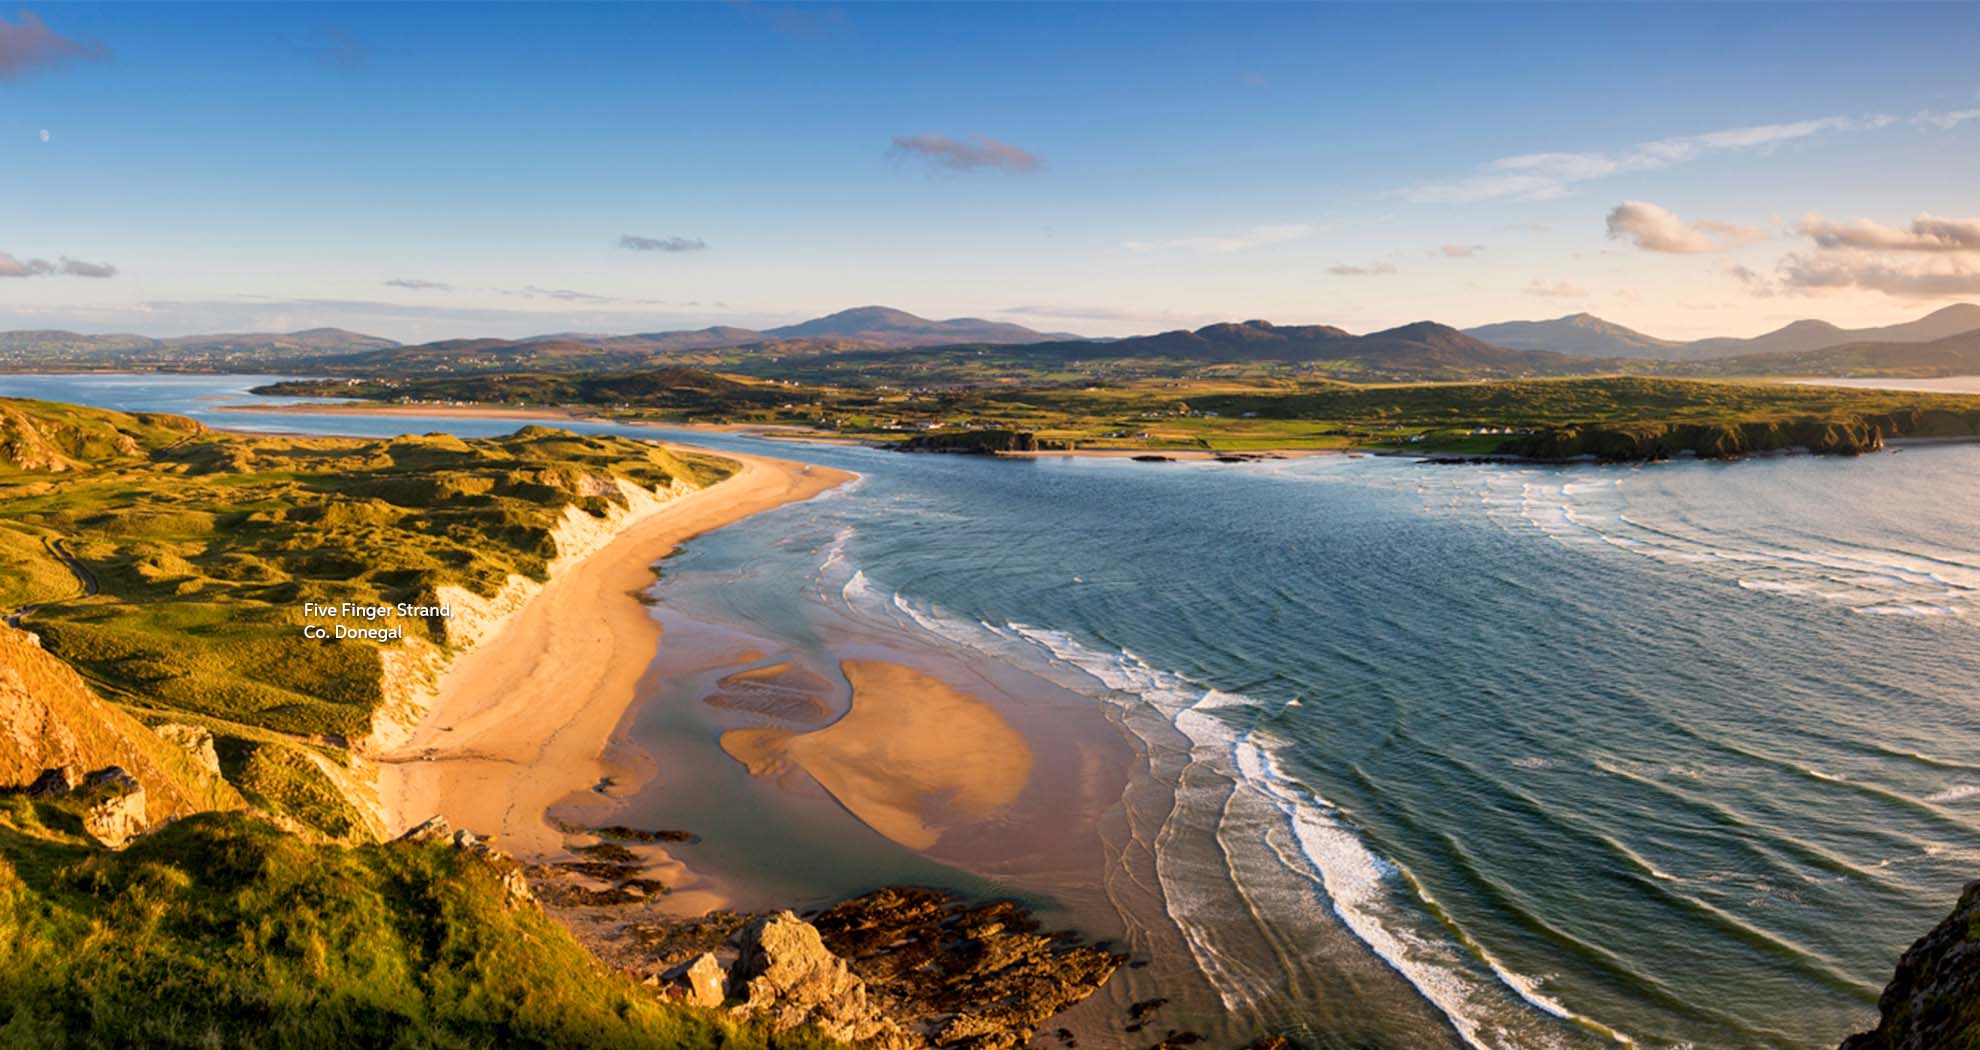 A wide aerial view of the Five Finger Strand, Donegal